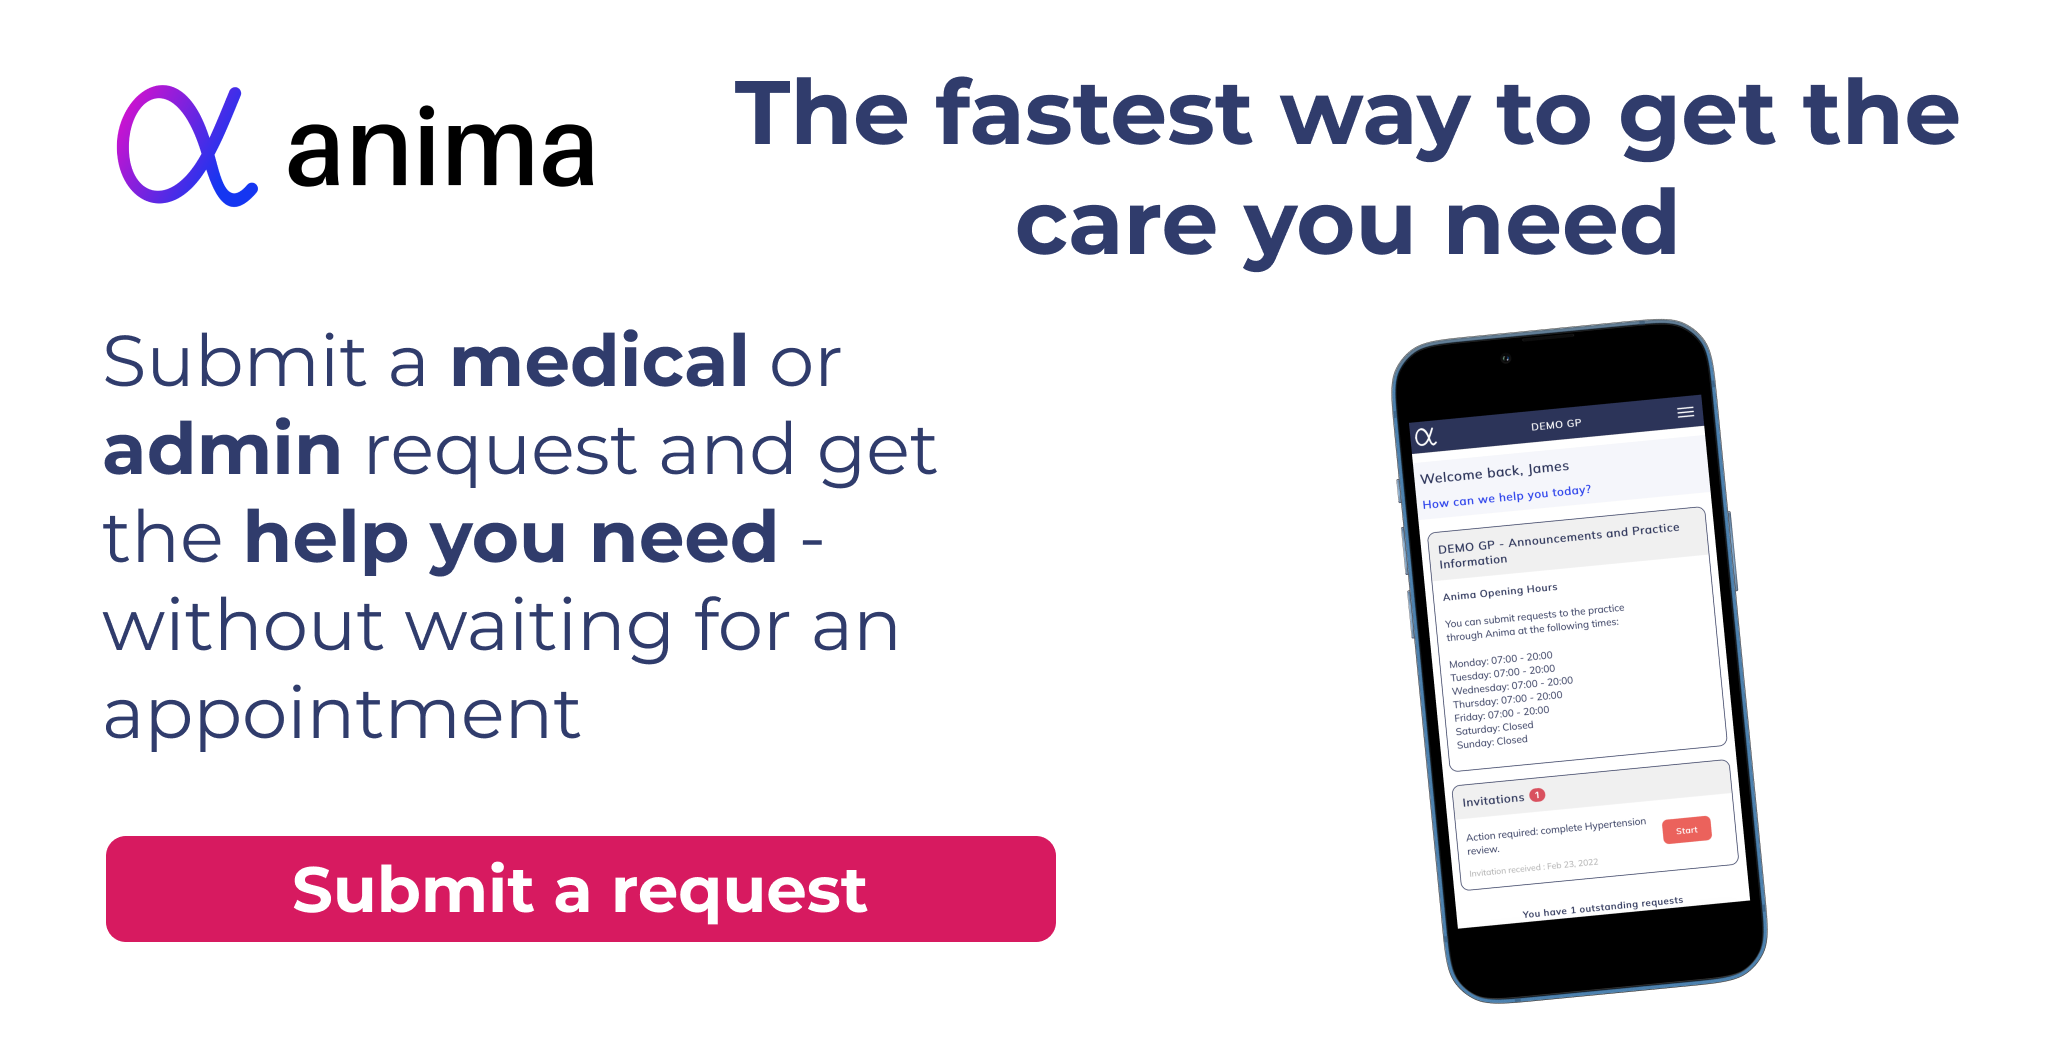 anima submit a medical or admin request - image shows  a mobile phone with the anima site on it